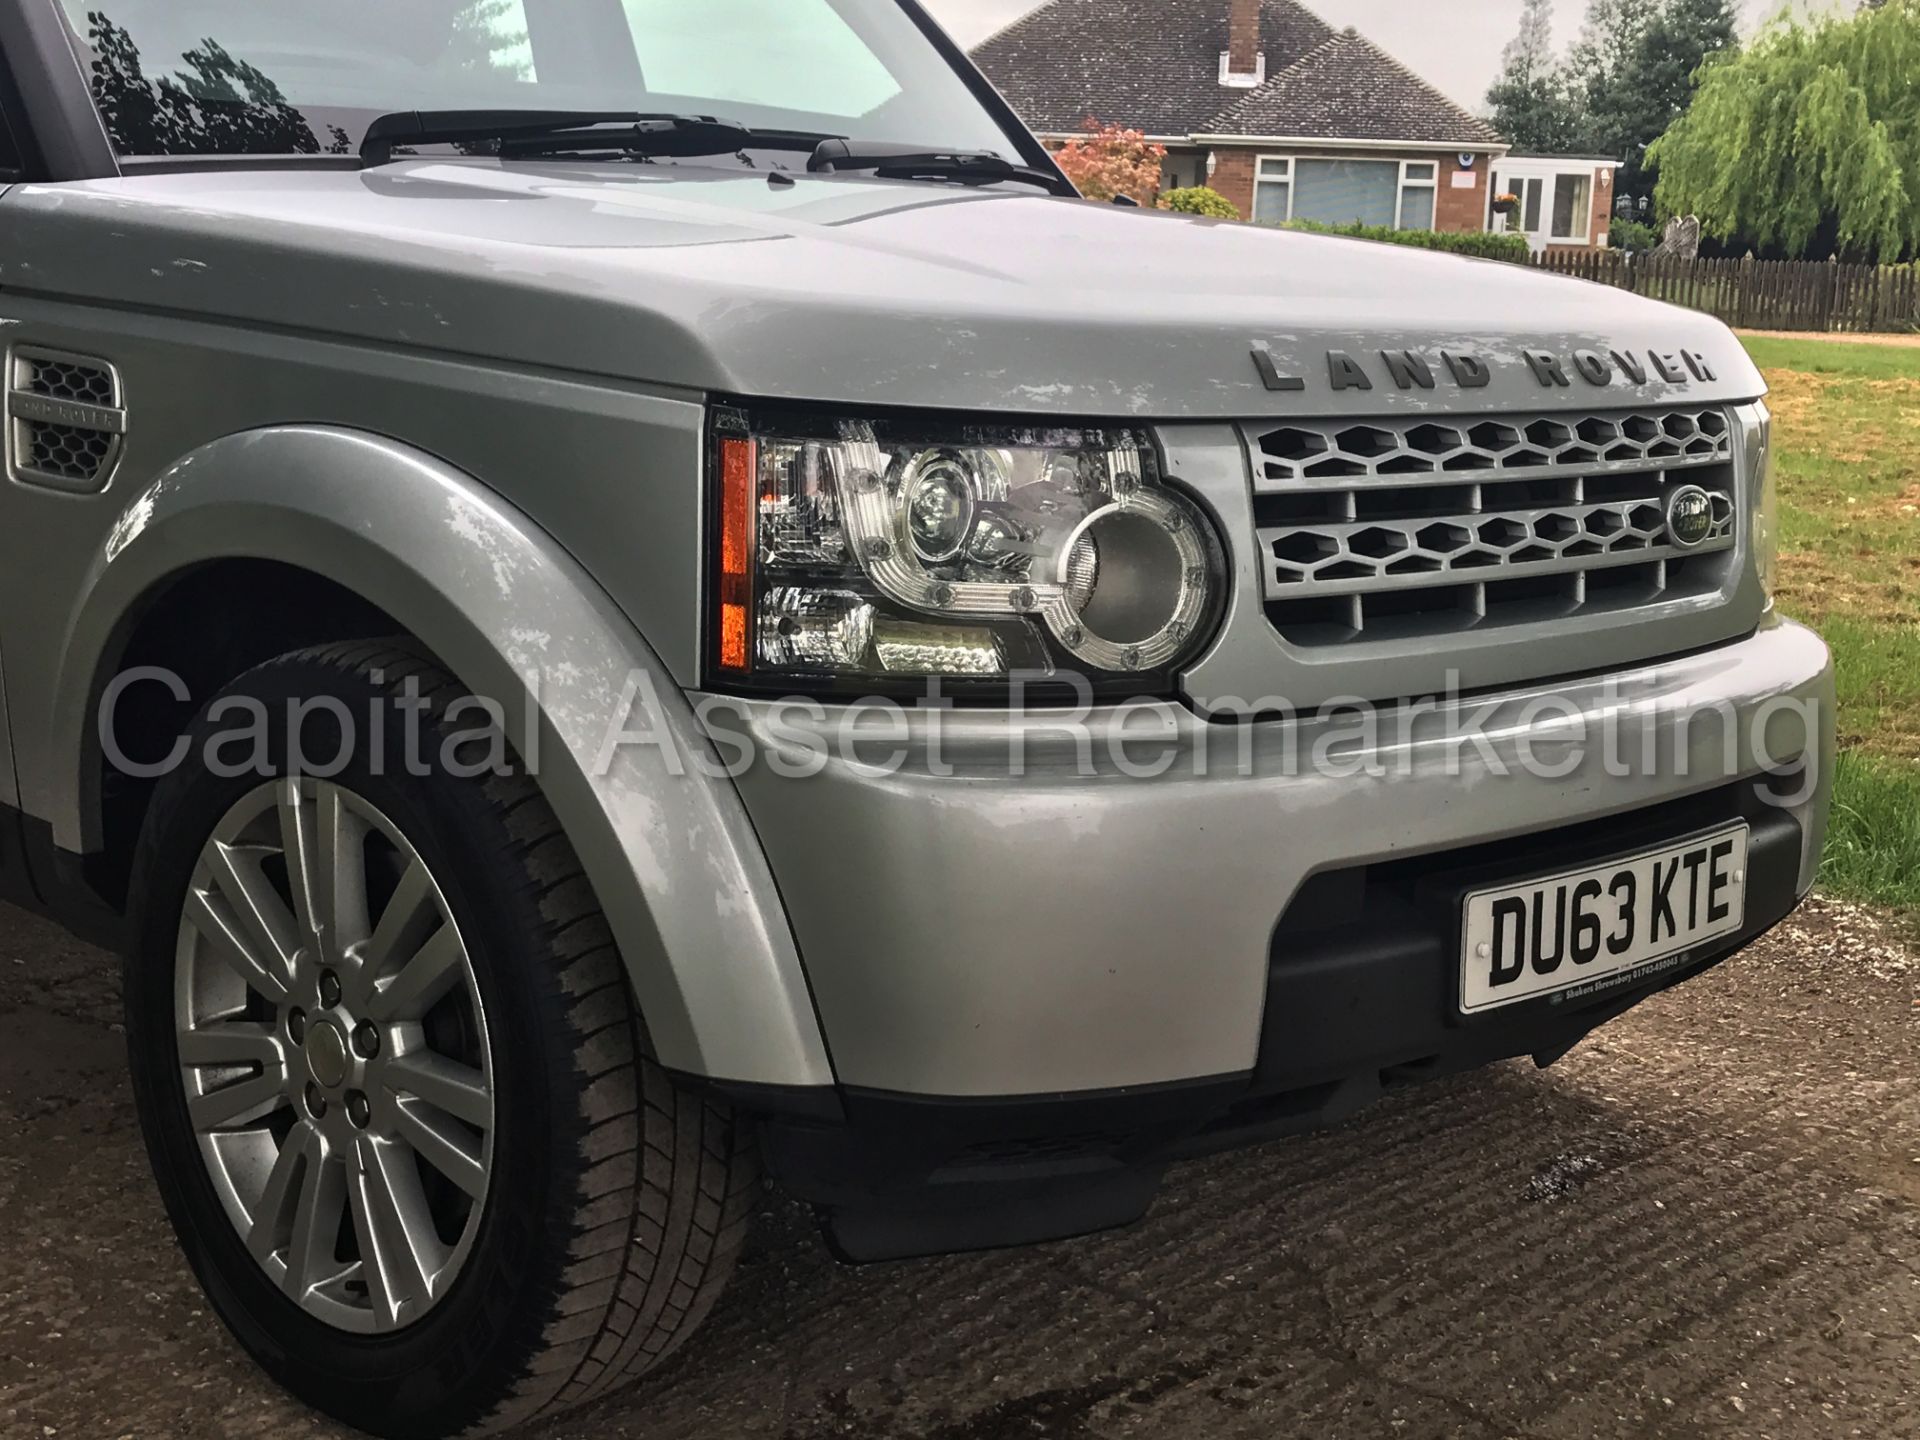 (On sale) LAND ROVER DISCOVERY 4 (2014 MODEL) '3.0 SDV6 -AUTO- 255 BHP - 7 SEATER'(1 OWNER FROM NEW) - Image 12 of 42